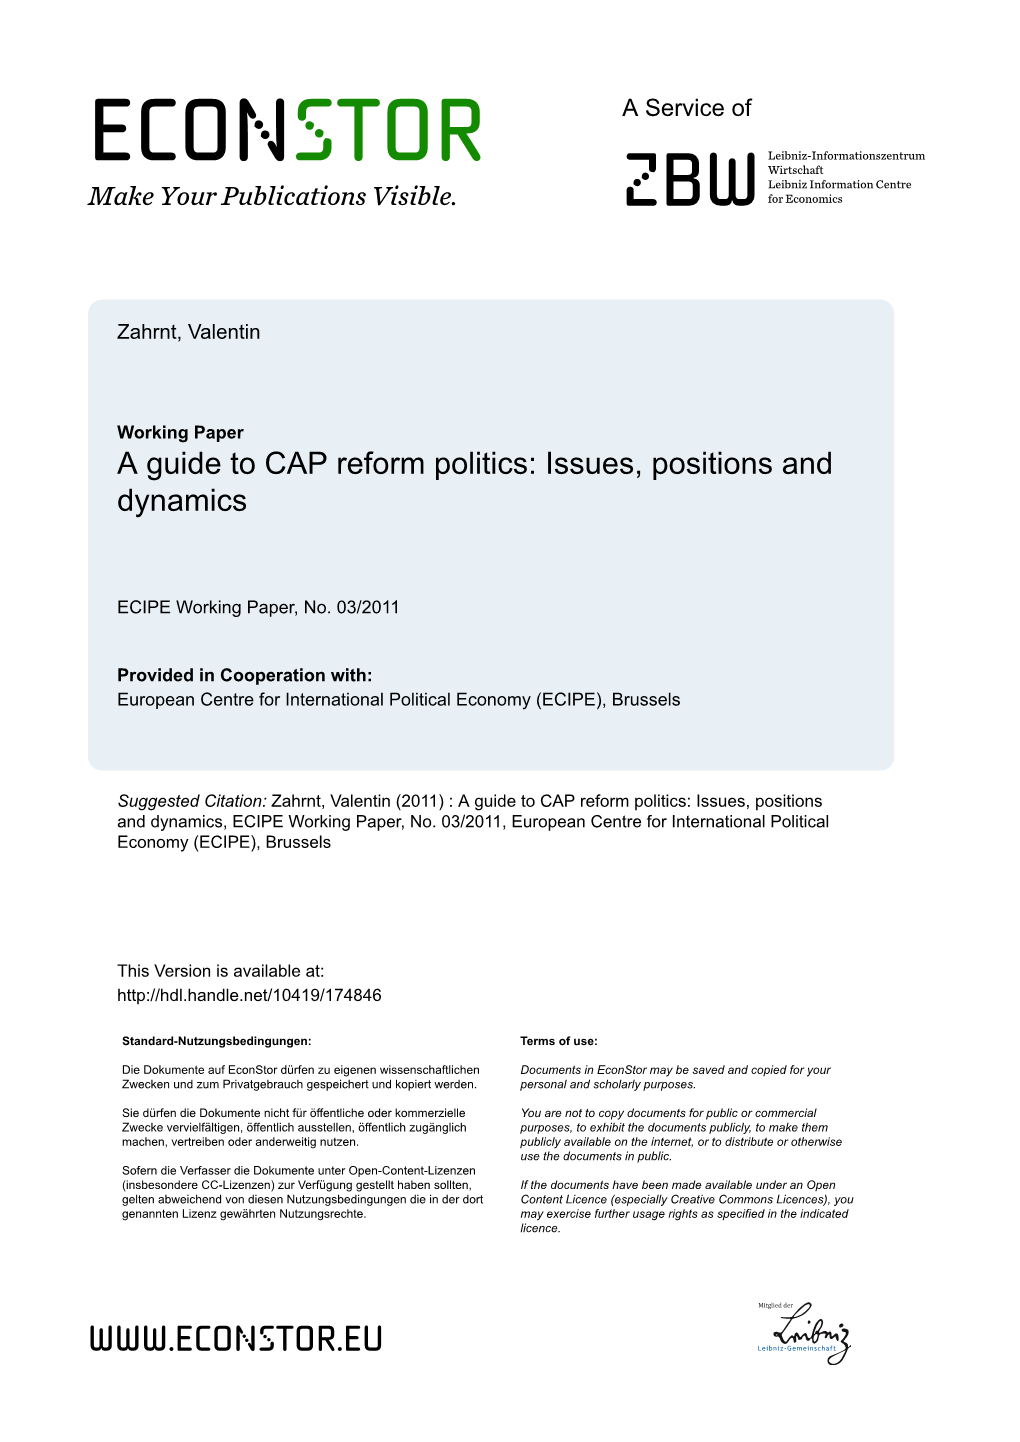 A Guide to CAP Reform Politics: Issues, Positions and Dynamics